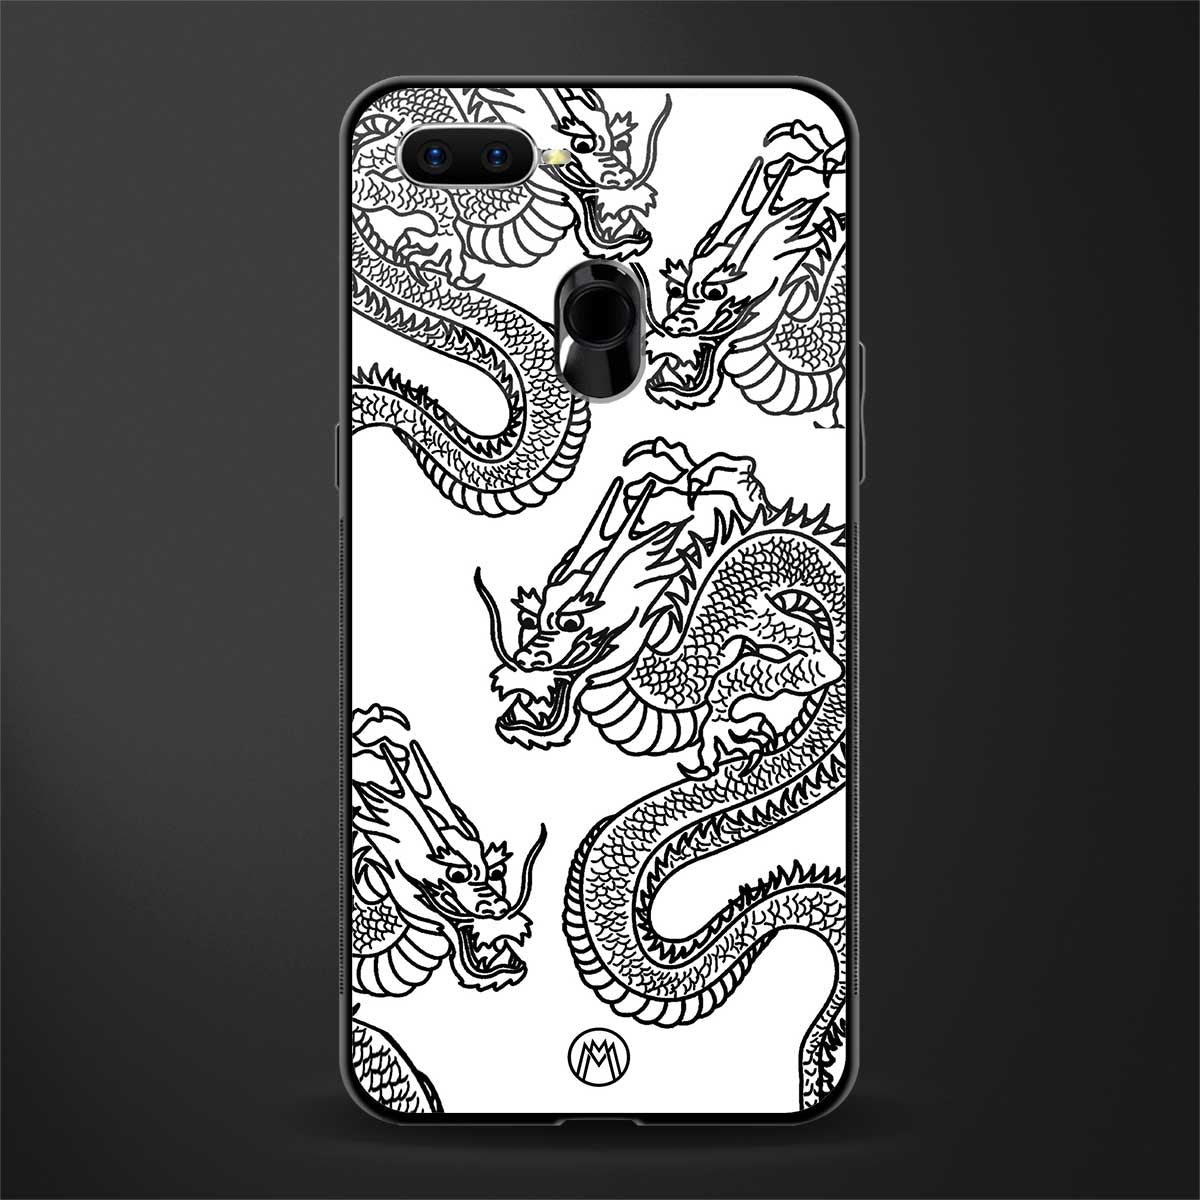 dragons lite glass case for oppo a7 image